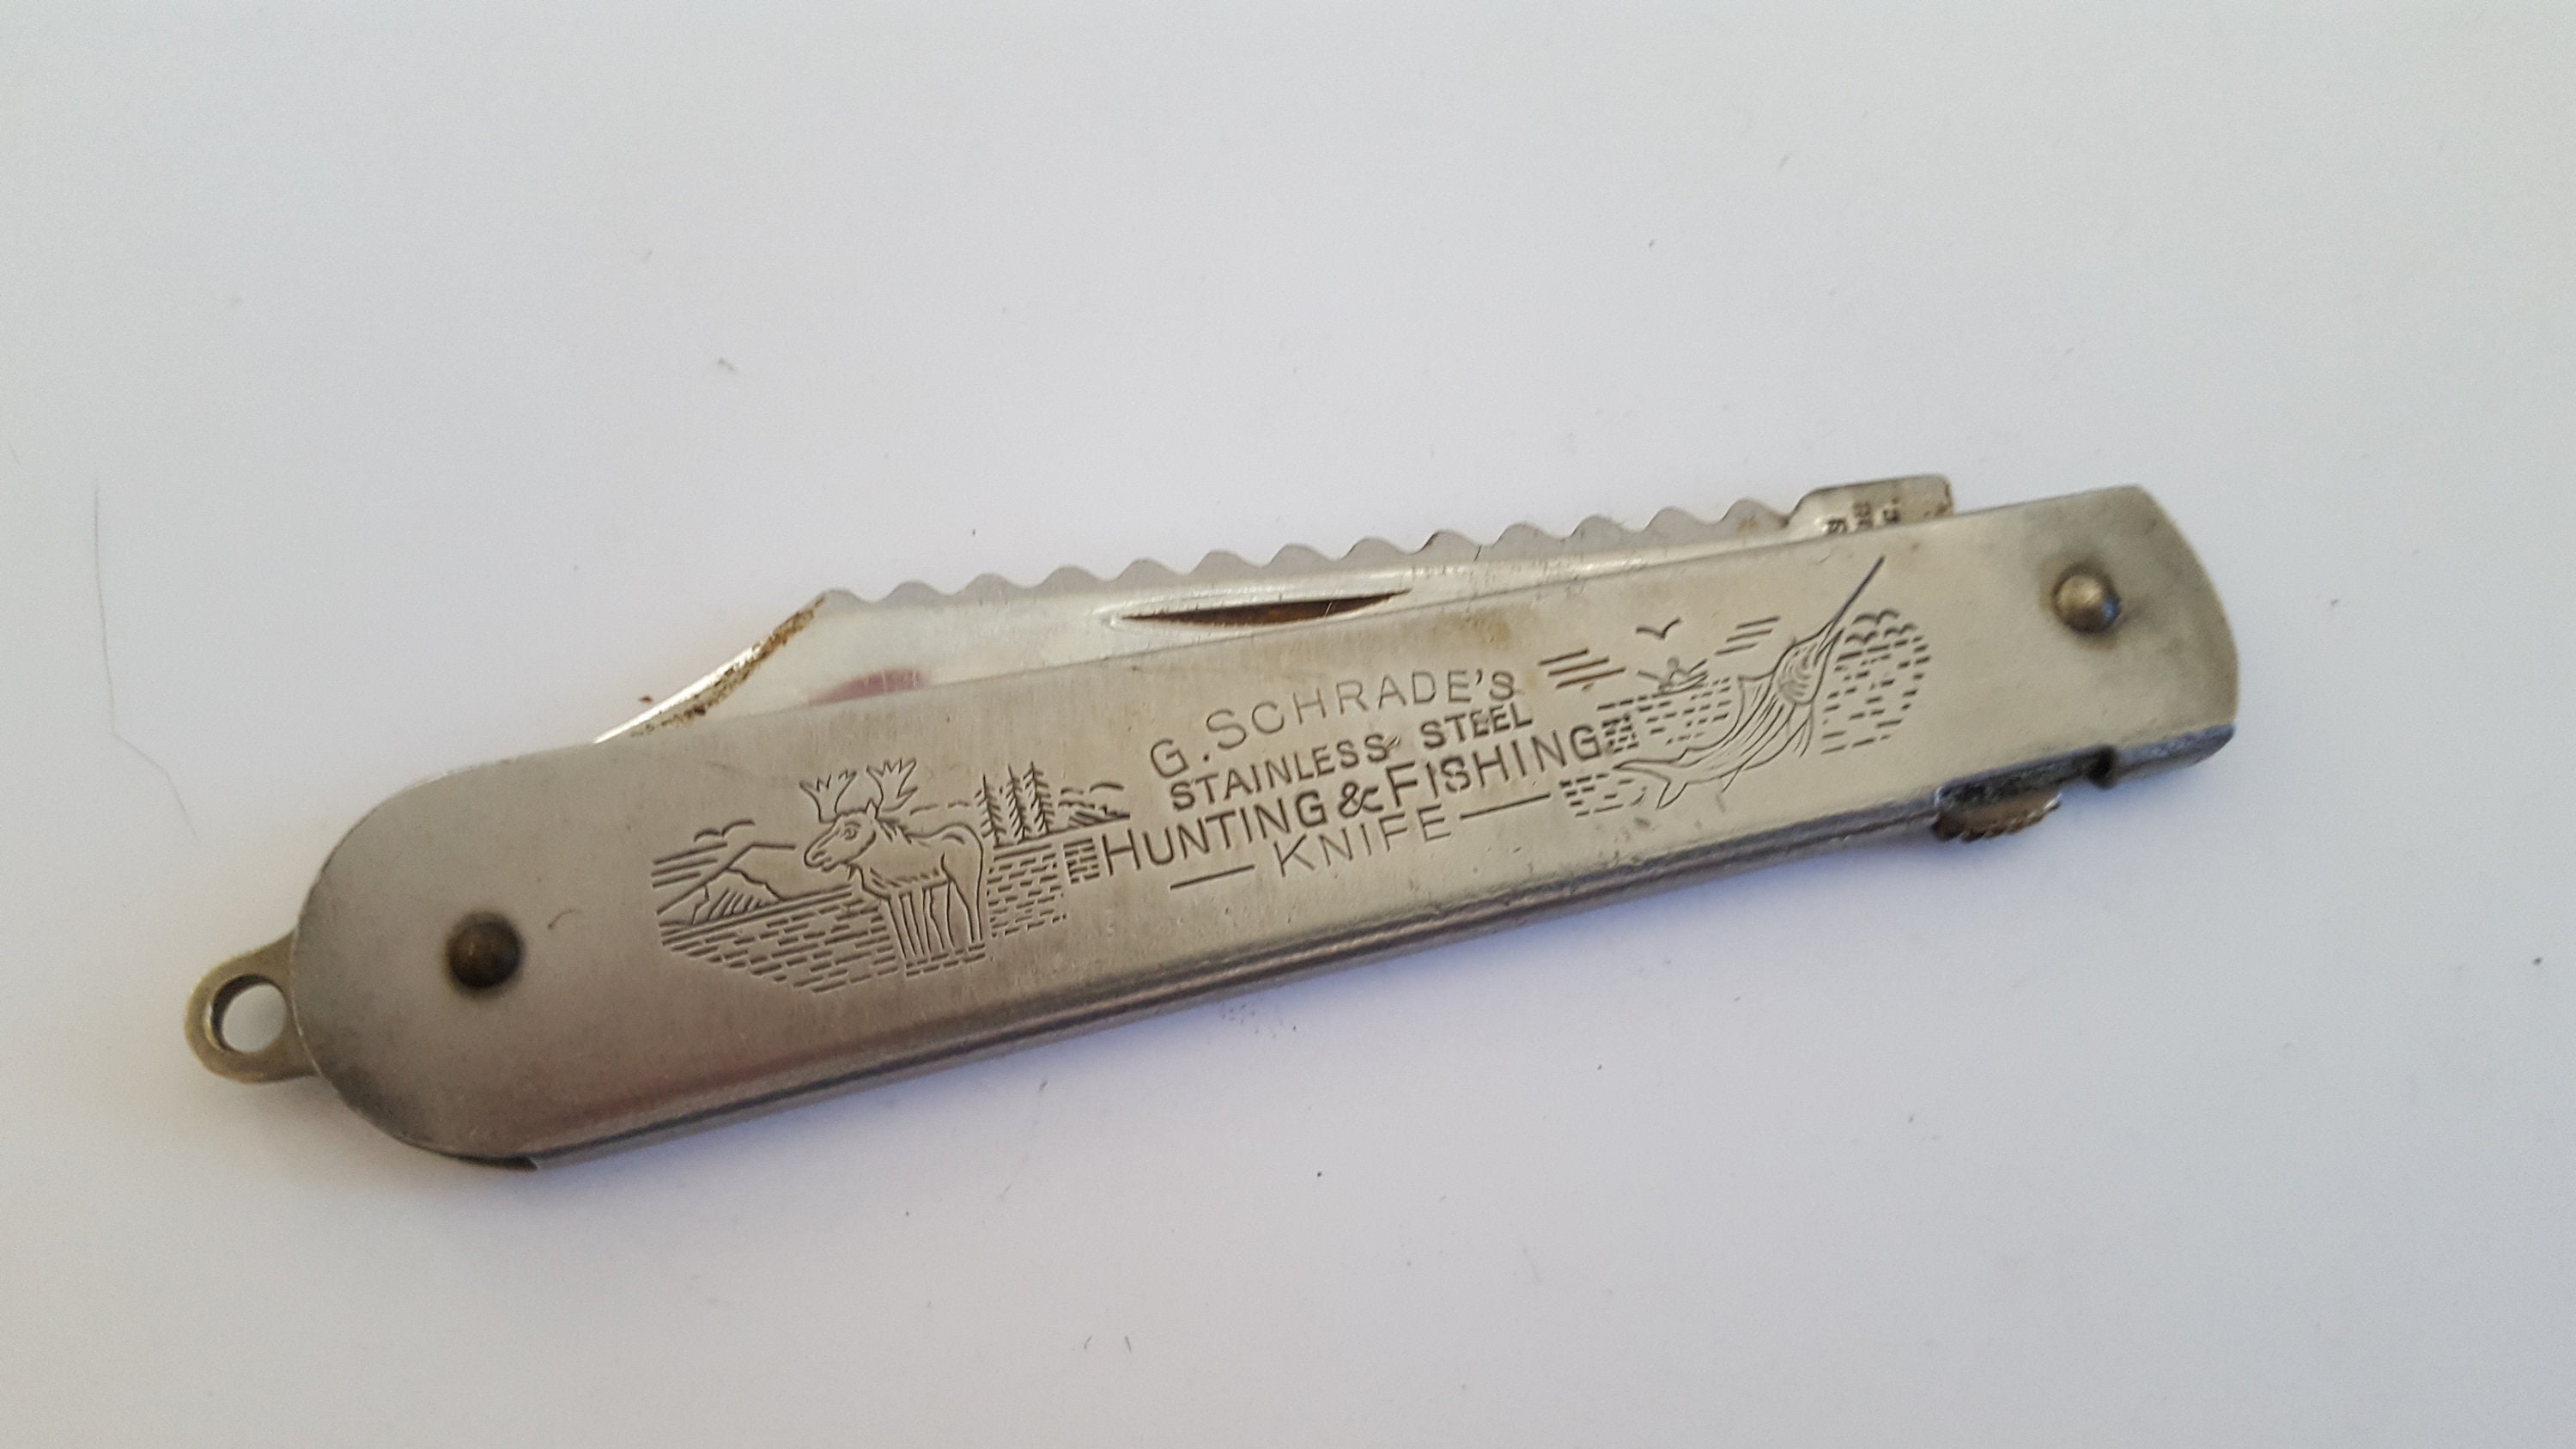 Vintage G. Schrade Stainless Steel Hunting and Fishing Knife, 1925-1946,  Bridgeport, Connecticut. Rare Collectible Knife With Locking Switch 